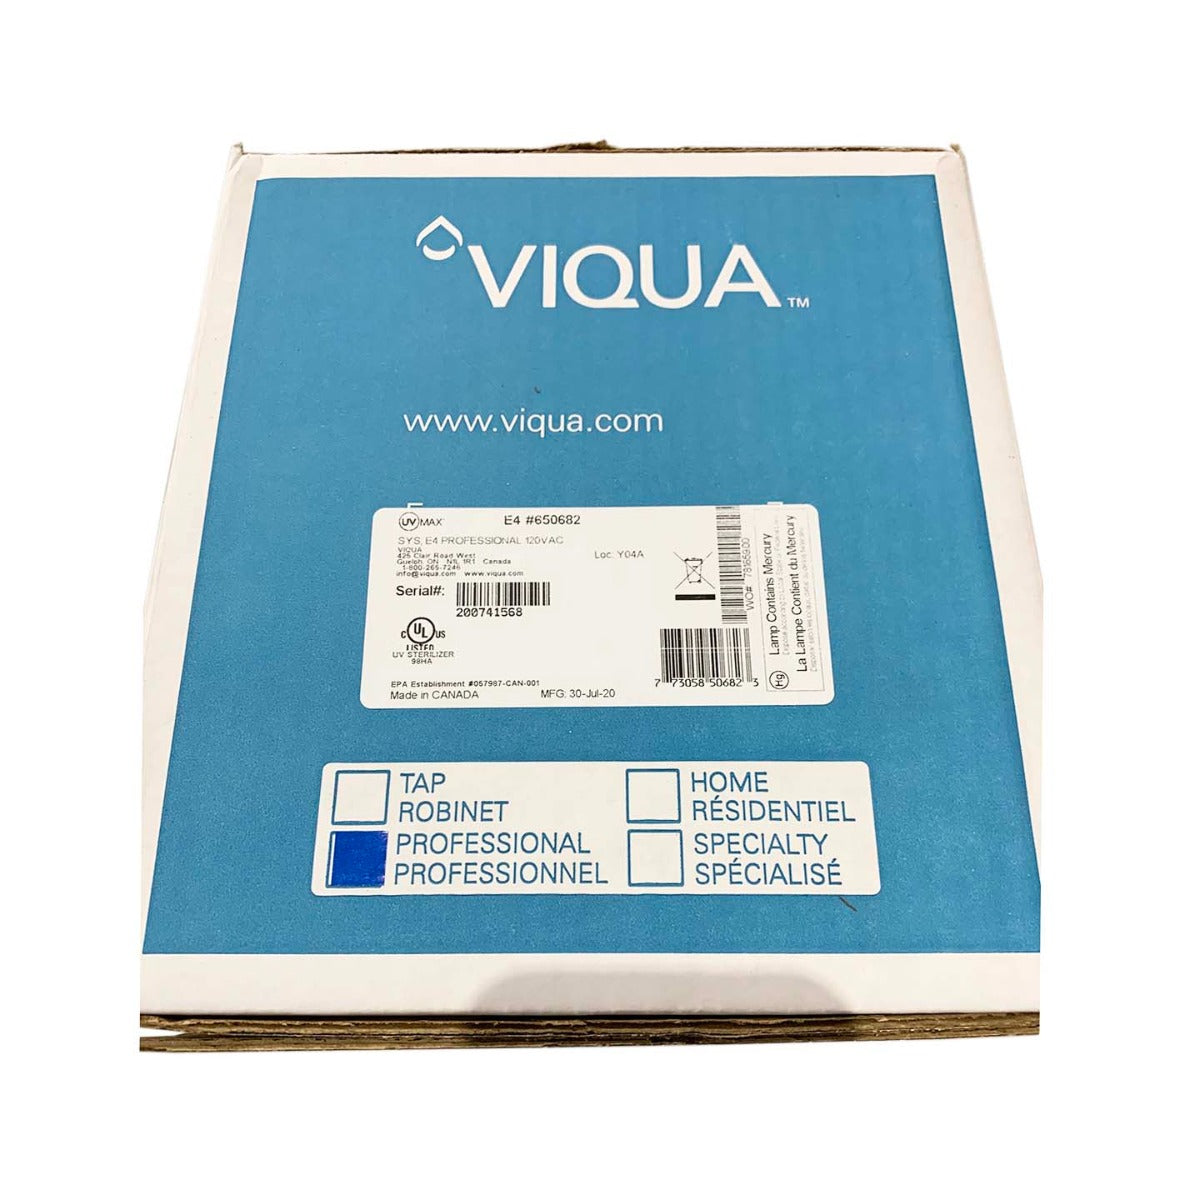 650682 E4 Professional UltraViolet Water Disinfection System by Viqua